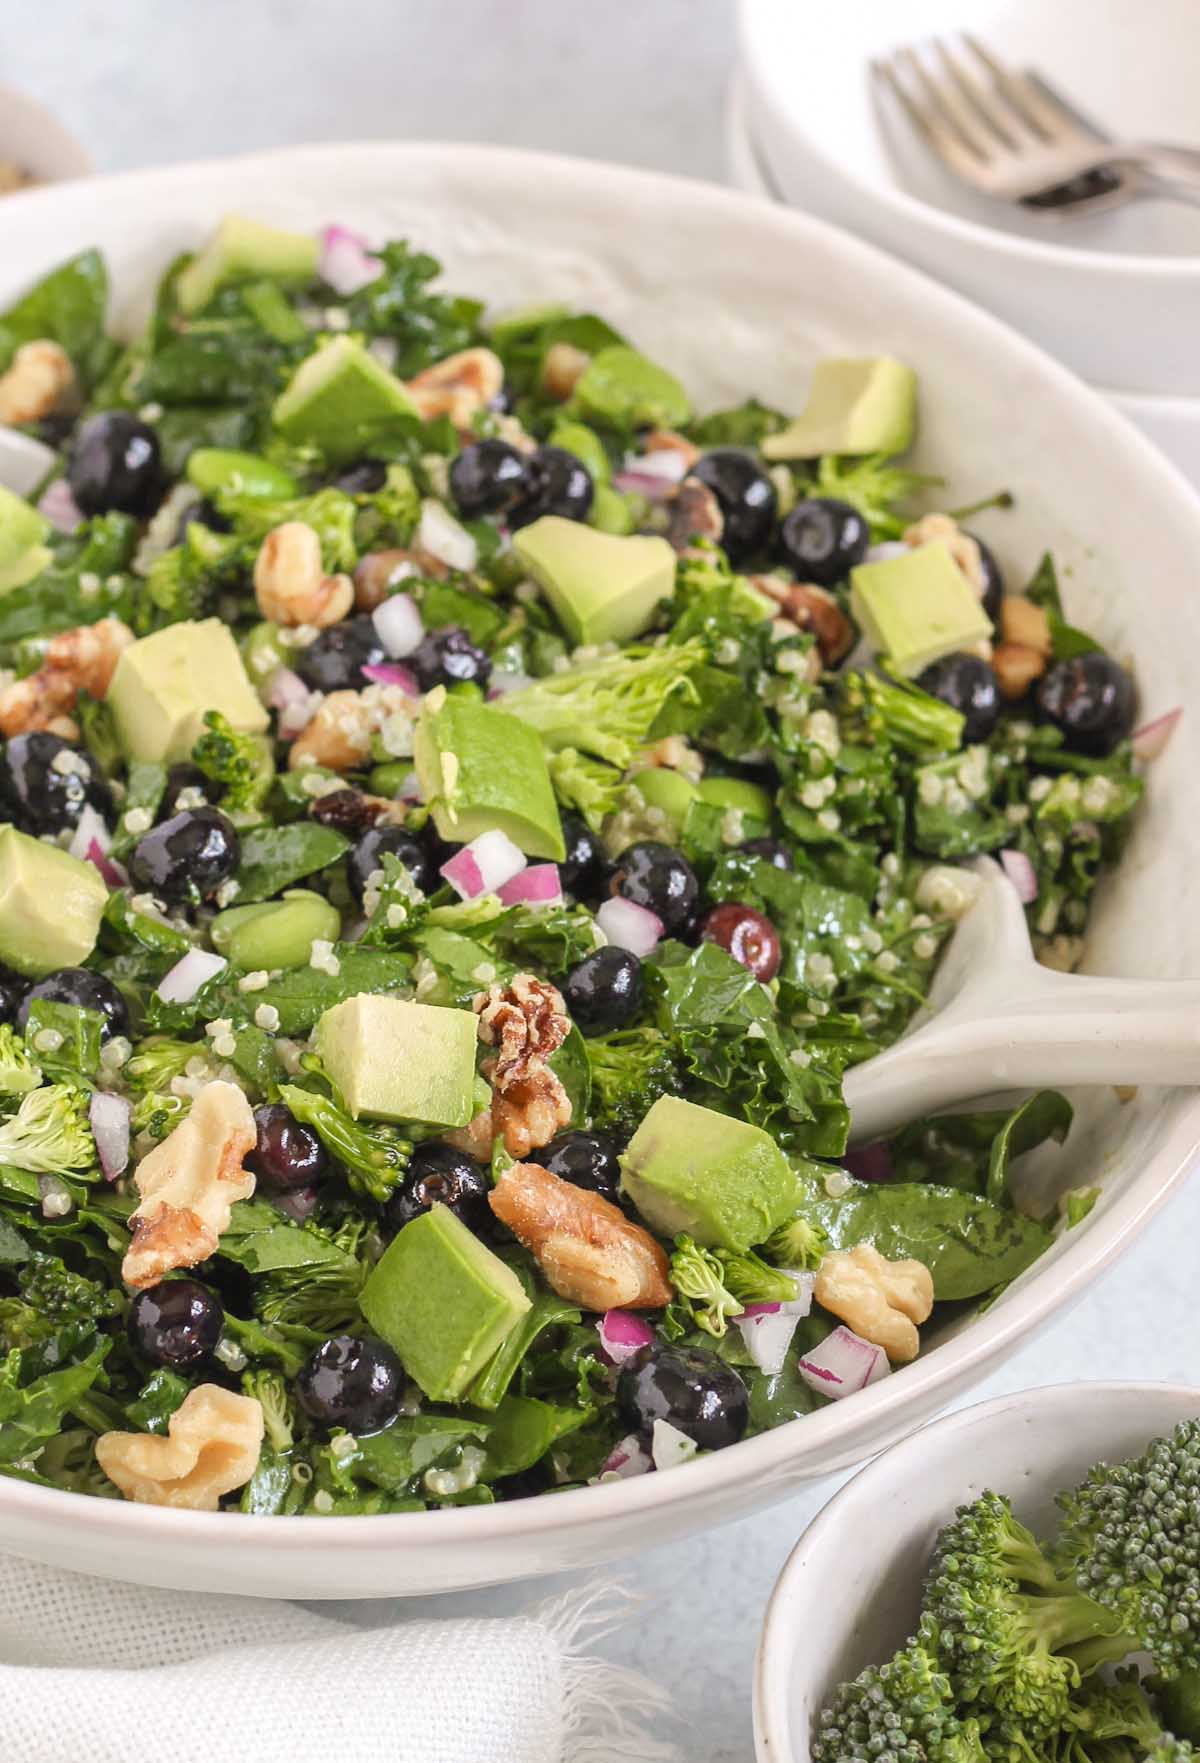 Superfood salad in a large white bowl with two small salad bowls and forks in the background.